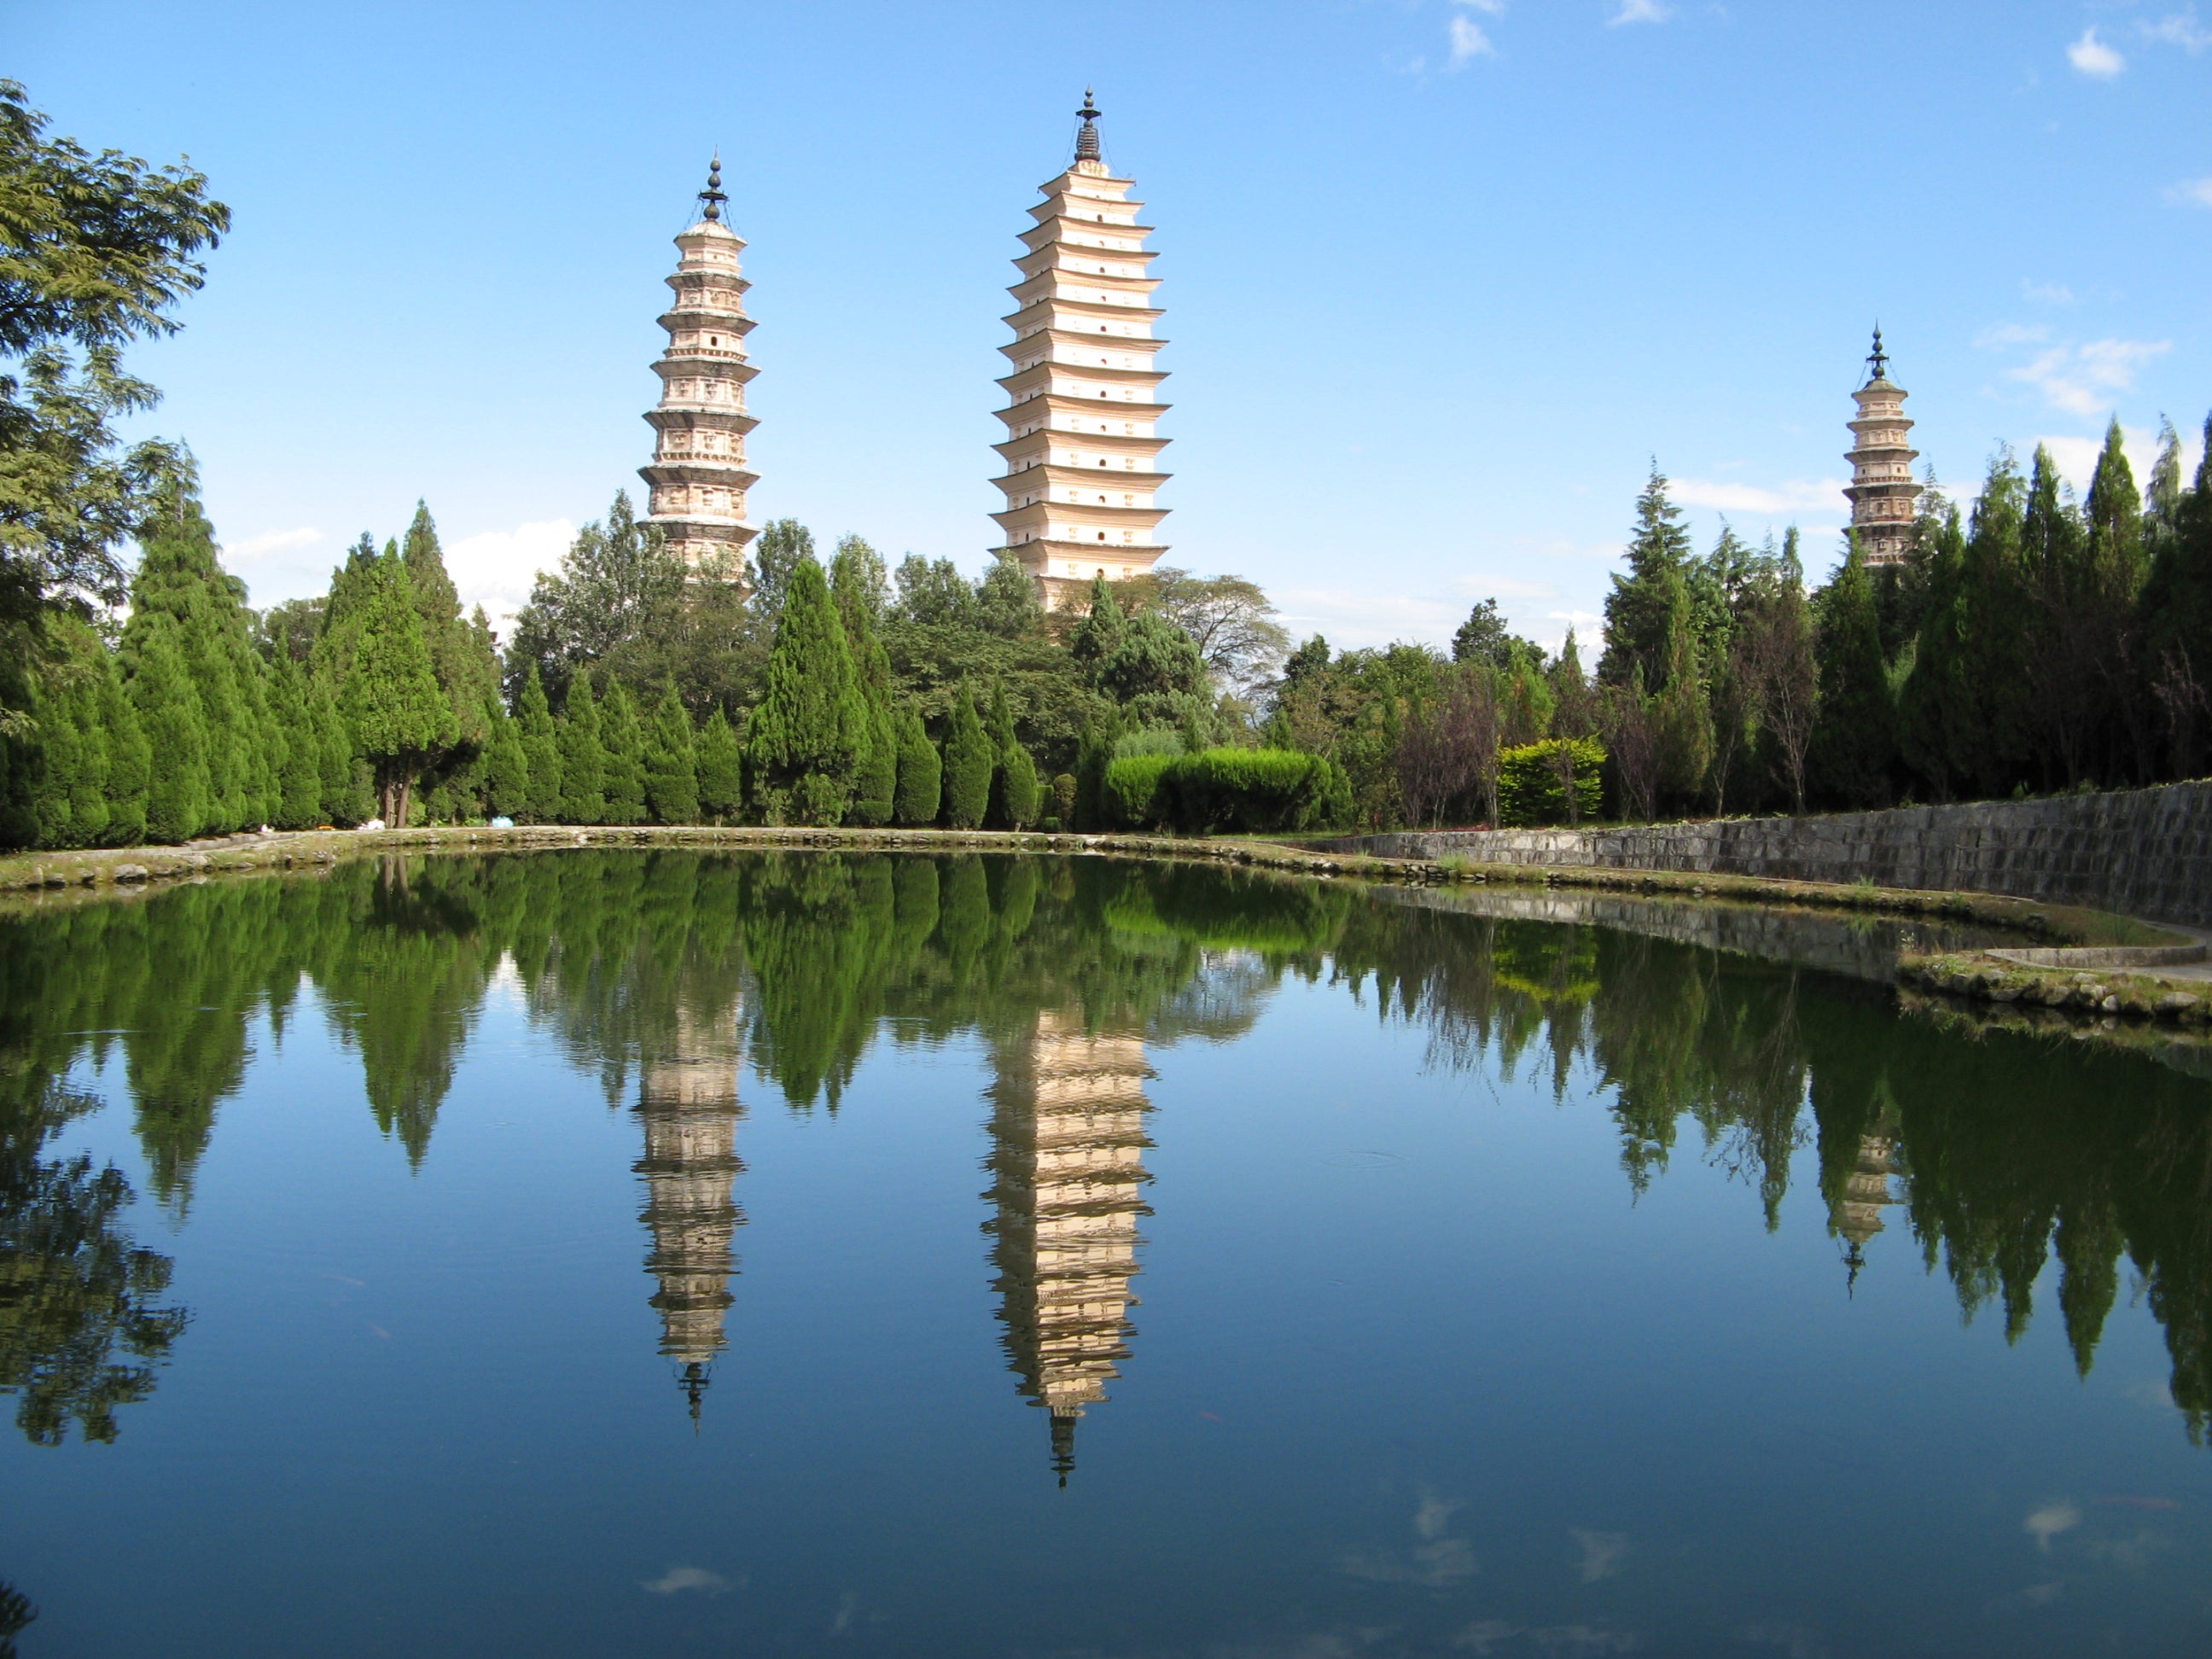 Despite the power and achievements of the Nanzhao Empire, very few of its major buildings survive today – apart from the newly discovered remnants of its great monastery - and the still standing 9th century pagoda in Dali (the middle structure in this photograph).